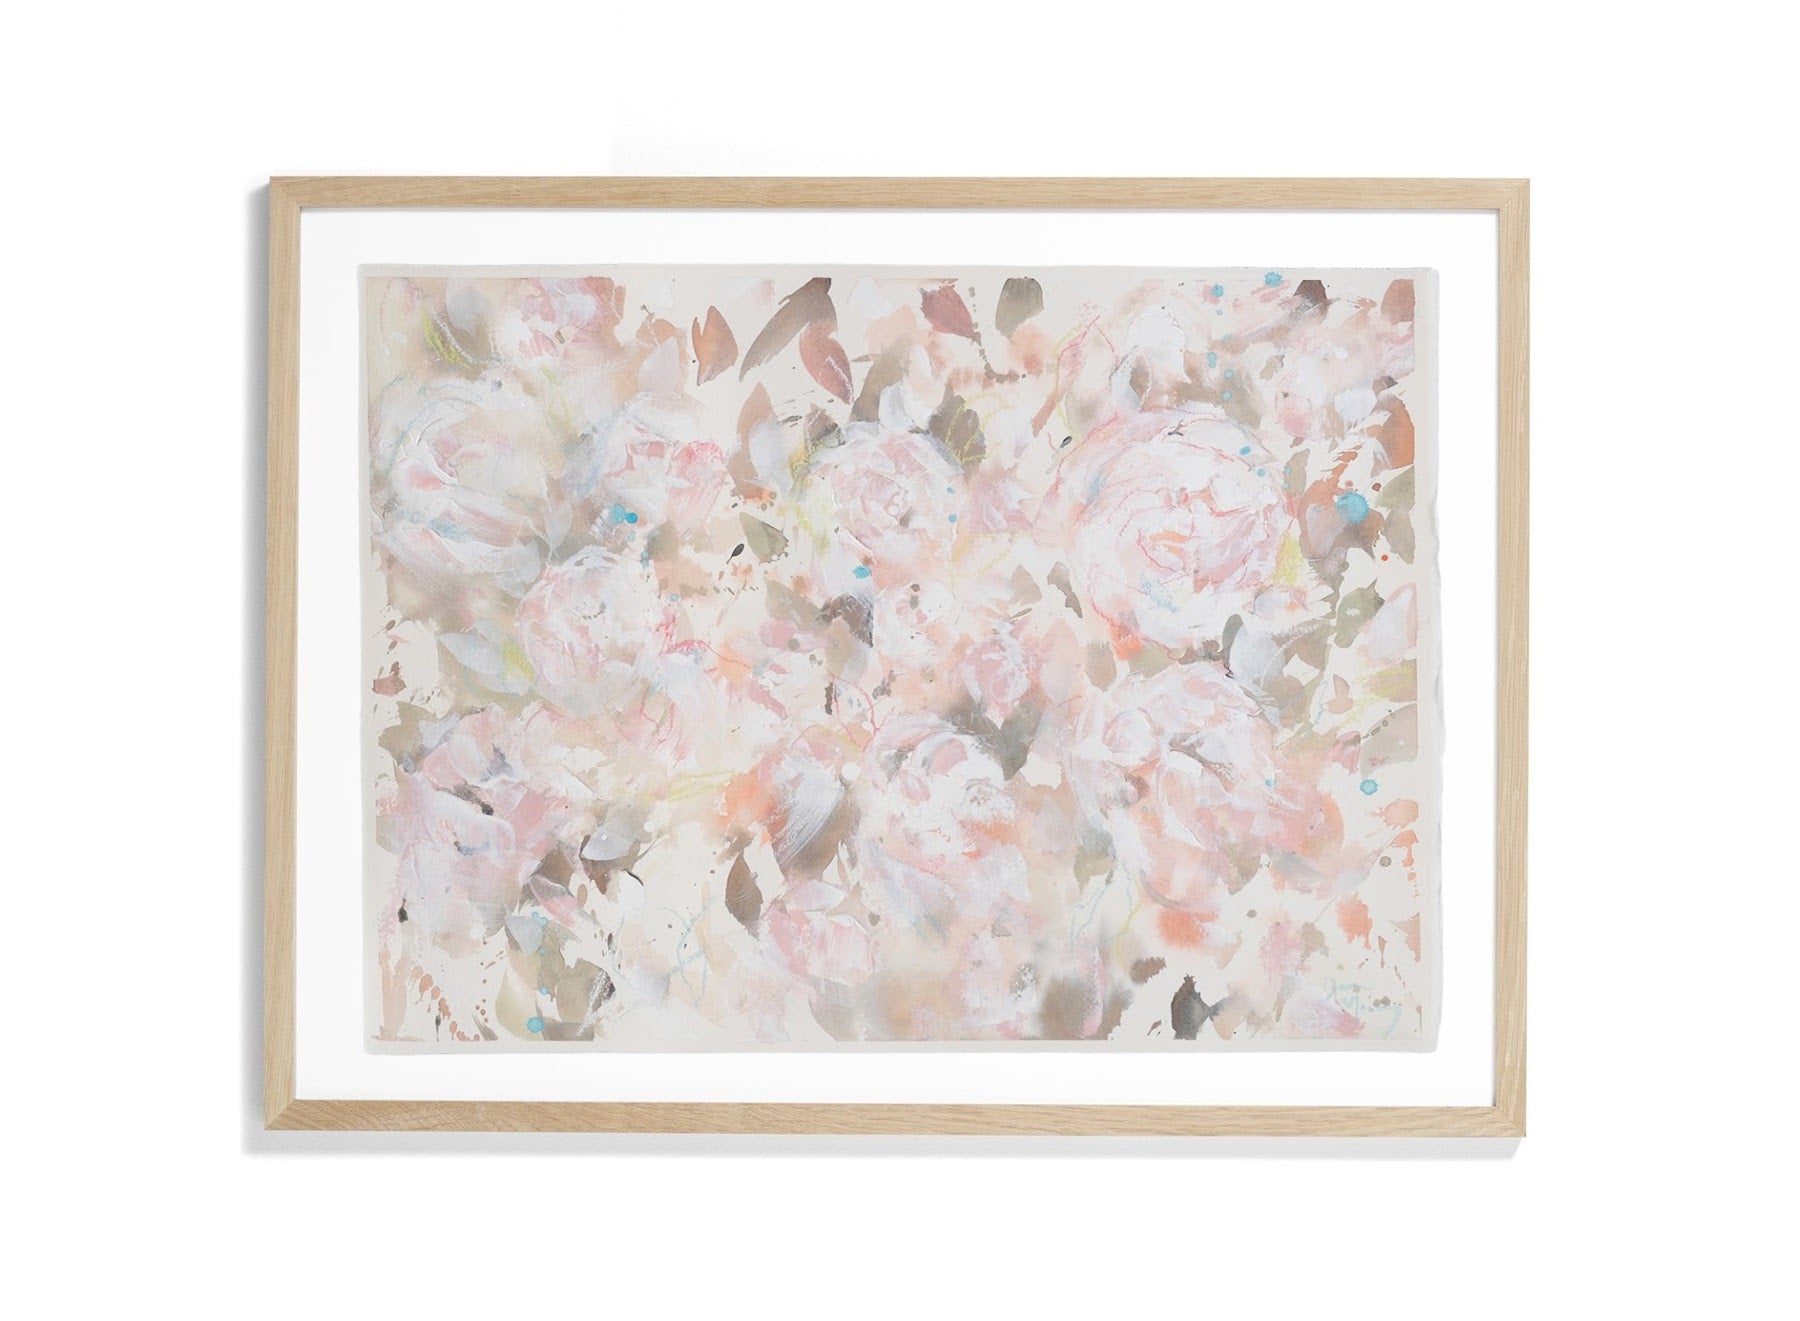 This warm toned mixed media floral painting on paper is soft and welcoming.  With a colour palette of terracotta, blush, whites and aqua, this painting is complimentary to your home decor, inviting the viewer to pause and reflect. Watercolour leaves merge into one another as they dance behind abstracted peony petals. Shown here in a light wood frame.